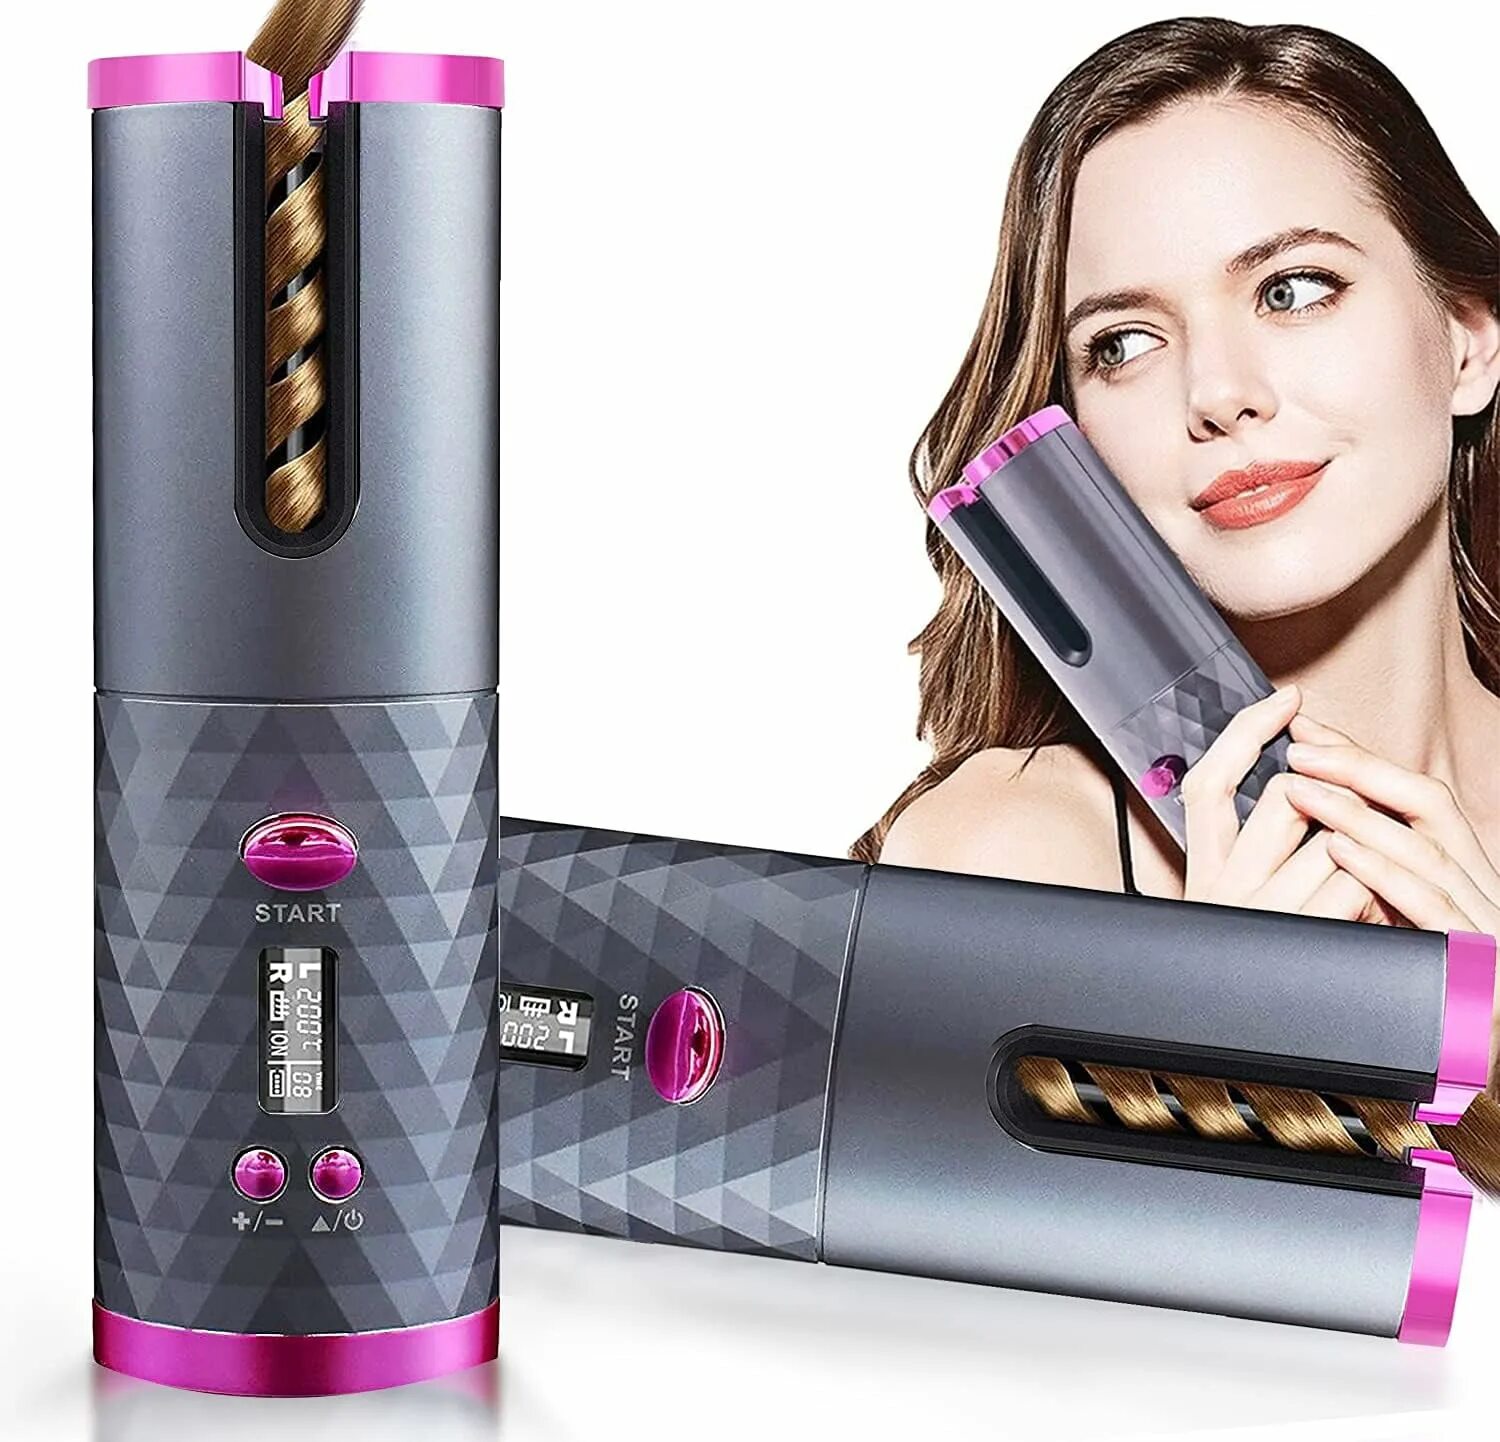 Automatic curler. Cordless Automatic Curler. Enchen Cordless Automatic hair Curler e4. Automatic hair Curling Iron. Dyson стайлер long.